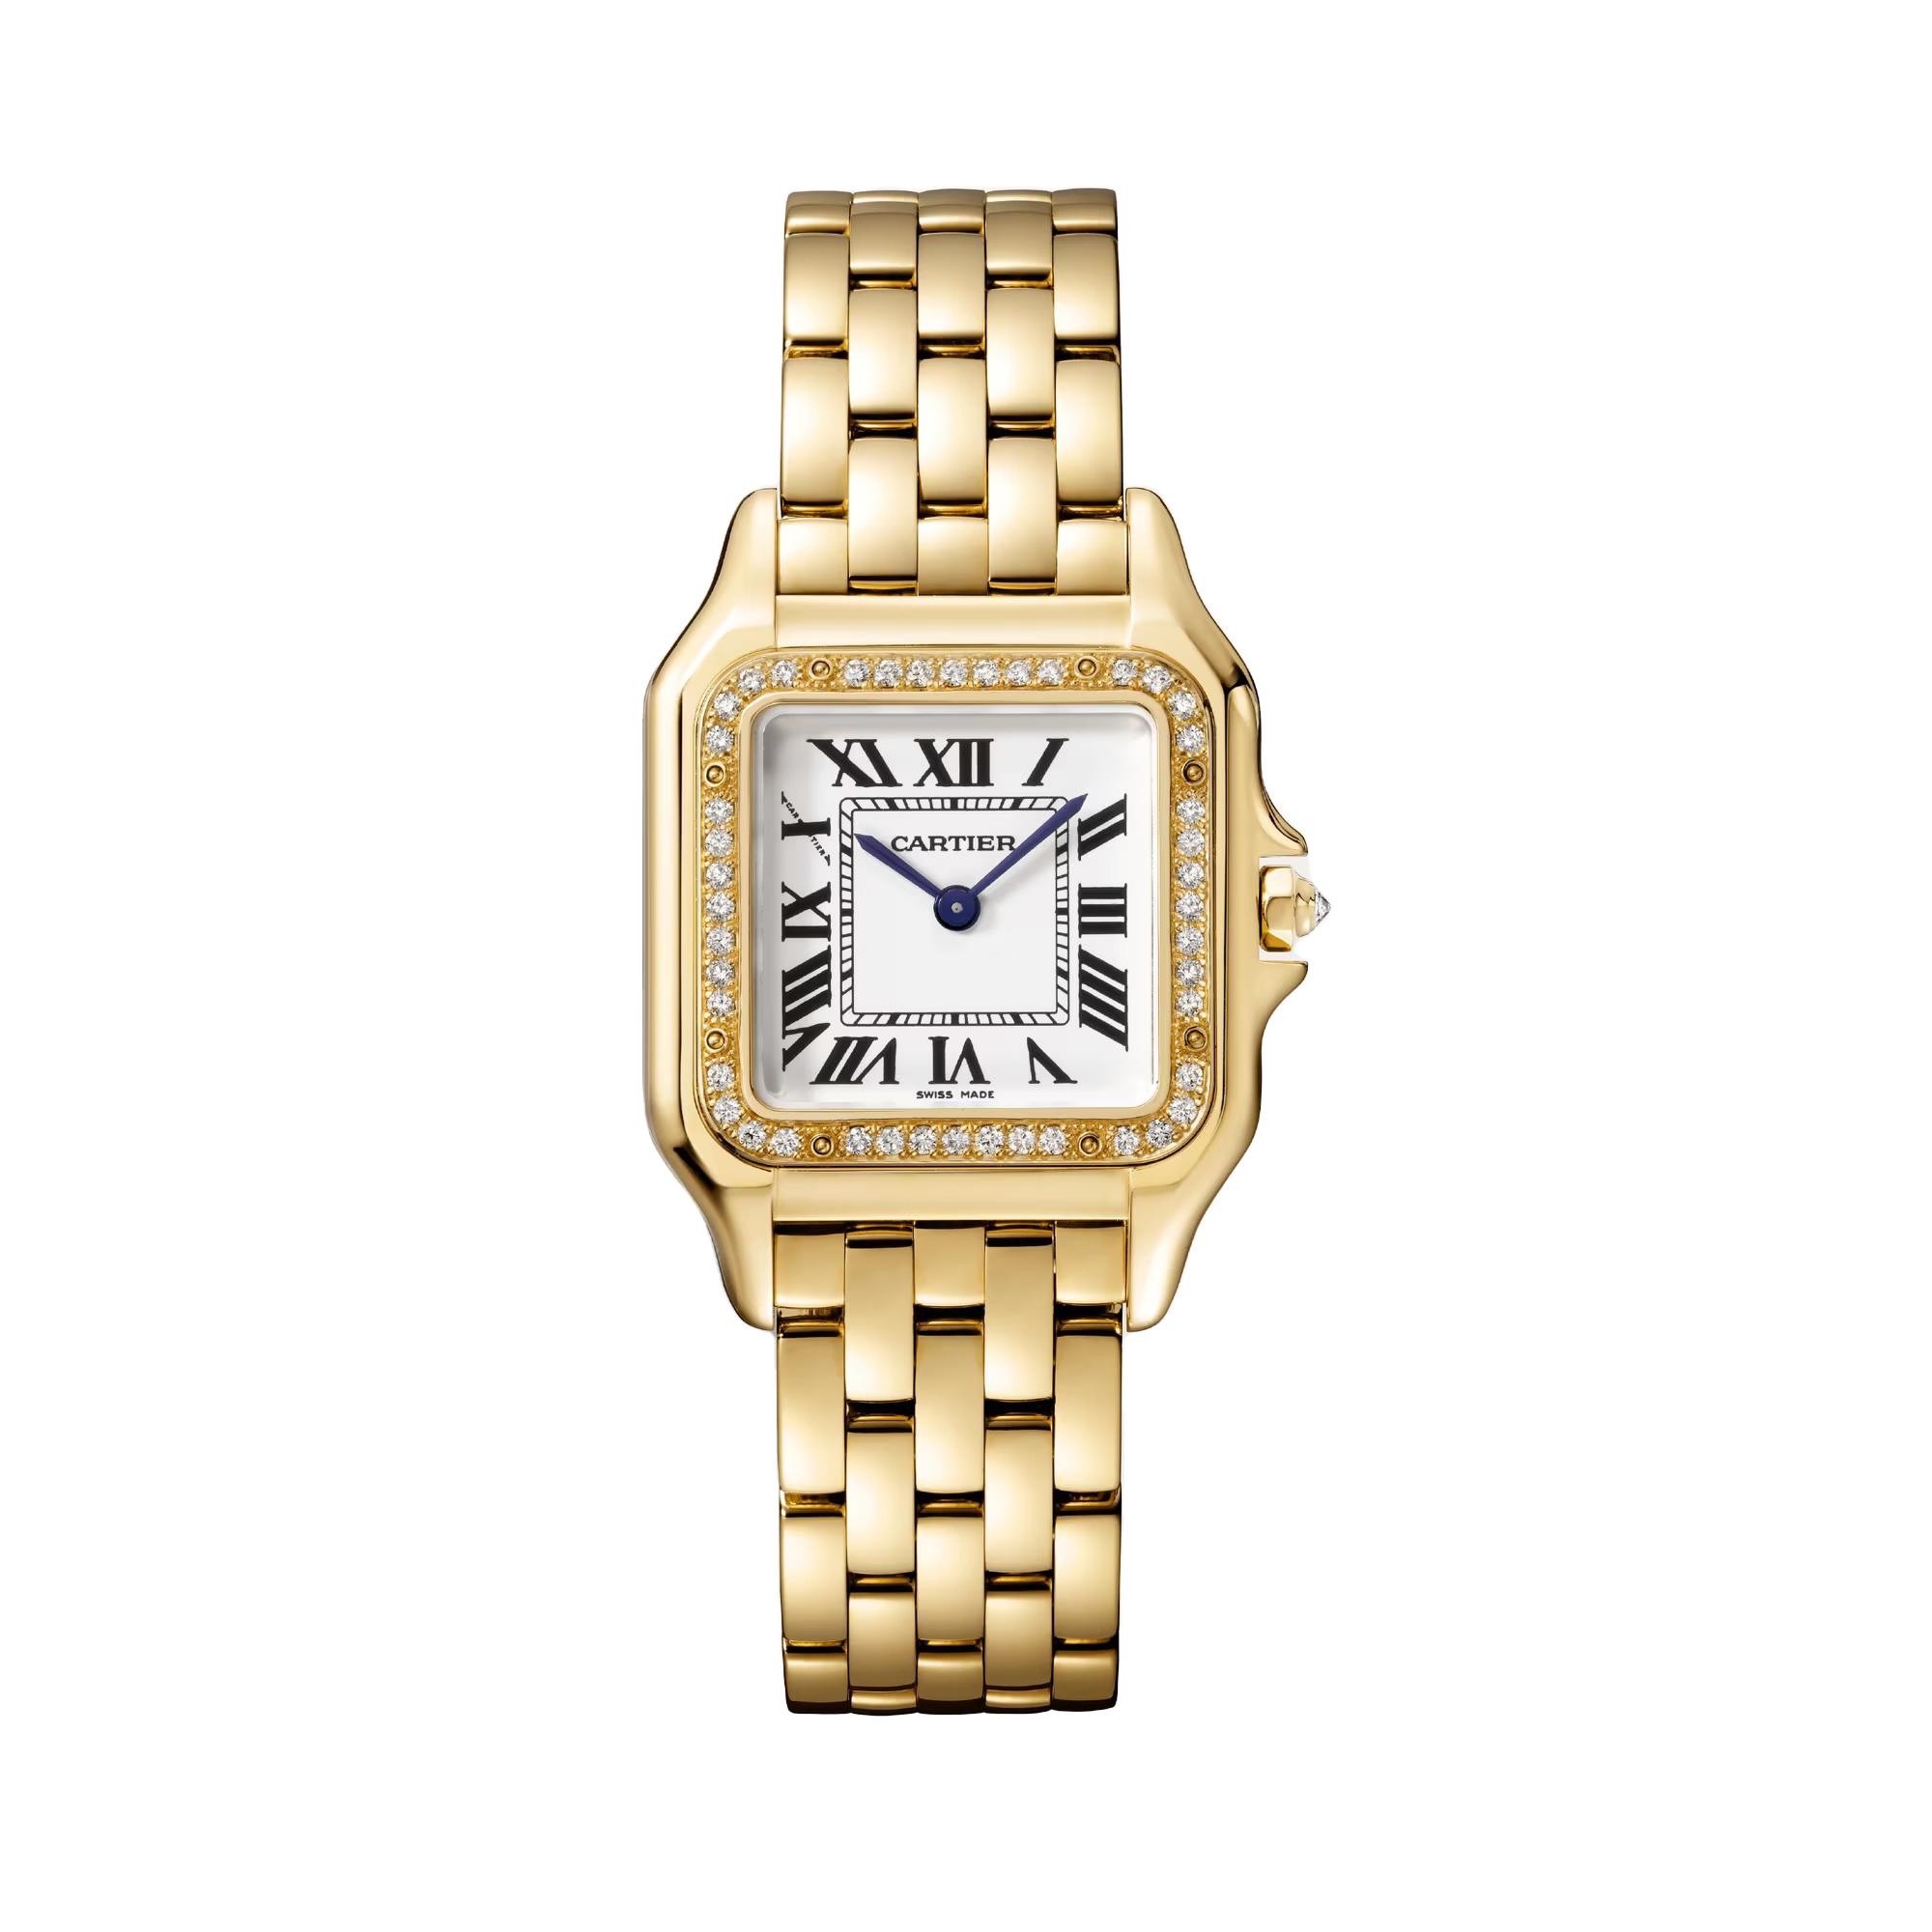 Panthere de Cartier Watch in Yellow Gold with Diamonds, medium model